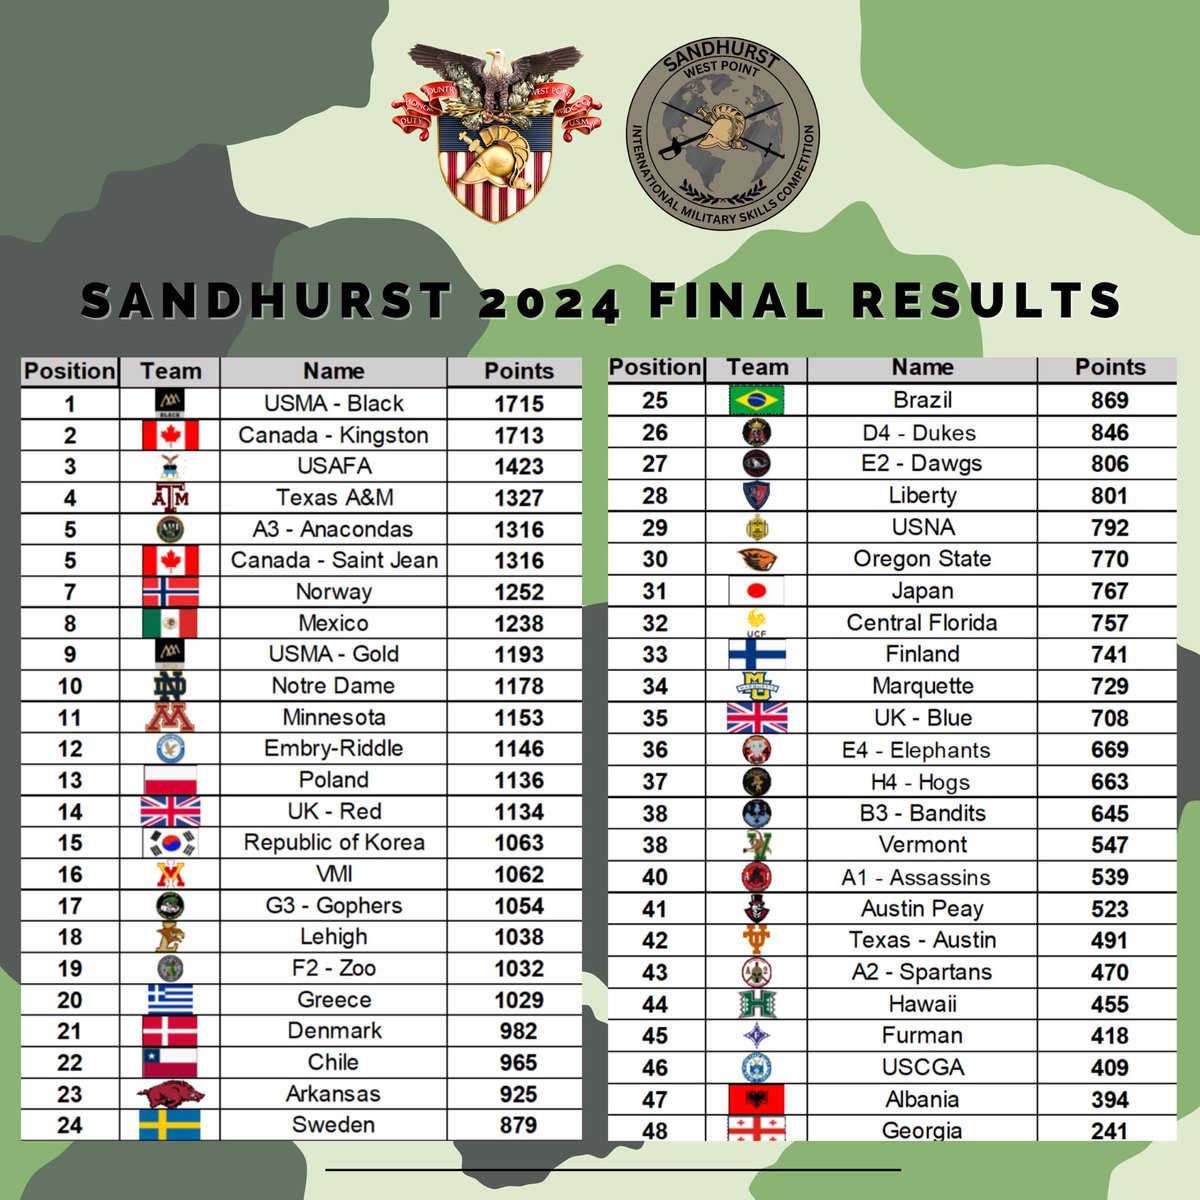 🔥𝐒𝐀𝐍𝐃𝐇𝐔𝐒𝐓 𝟐𝟎𝟐𝟒 𝐅𝐈𝐍𝐀𝐋 𝐑𝐄𝐒𝐔𝐋𝐓𝐒! 🎉Congratulations to all 48 teams competing in the 2024 Sandhurst Military Skills competition! Your dedication, teamwork, and commitment to excellence are truly inspiring! We look forward to seeing you all next year! Check…